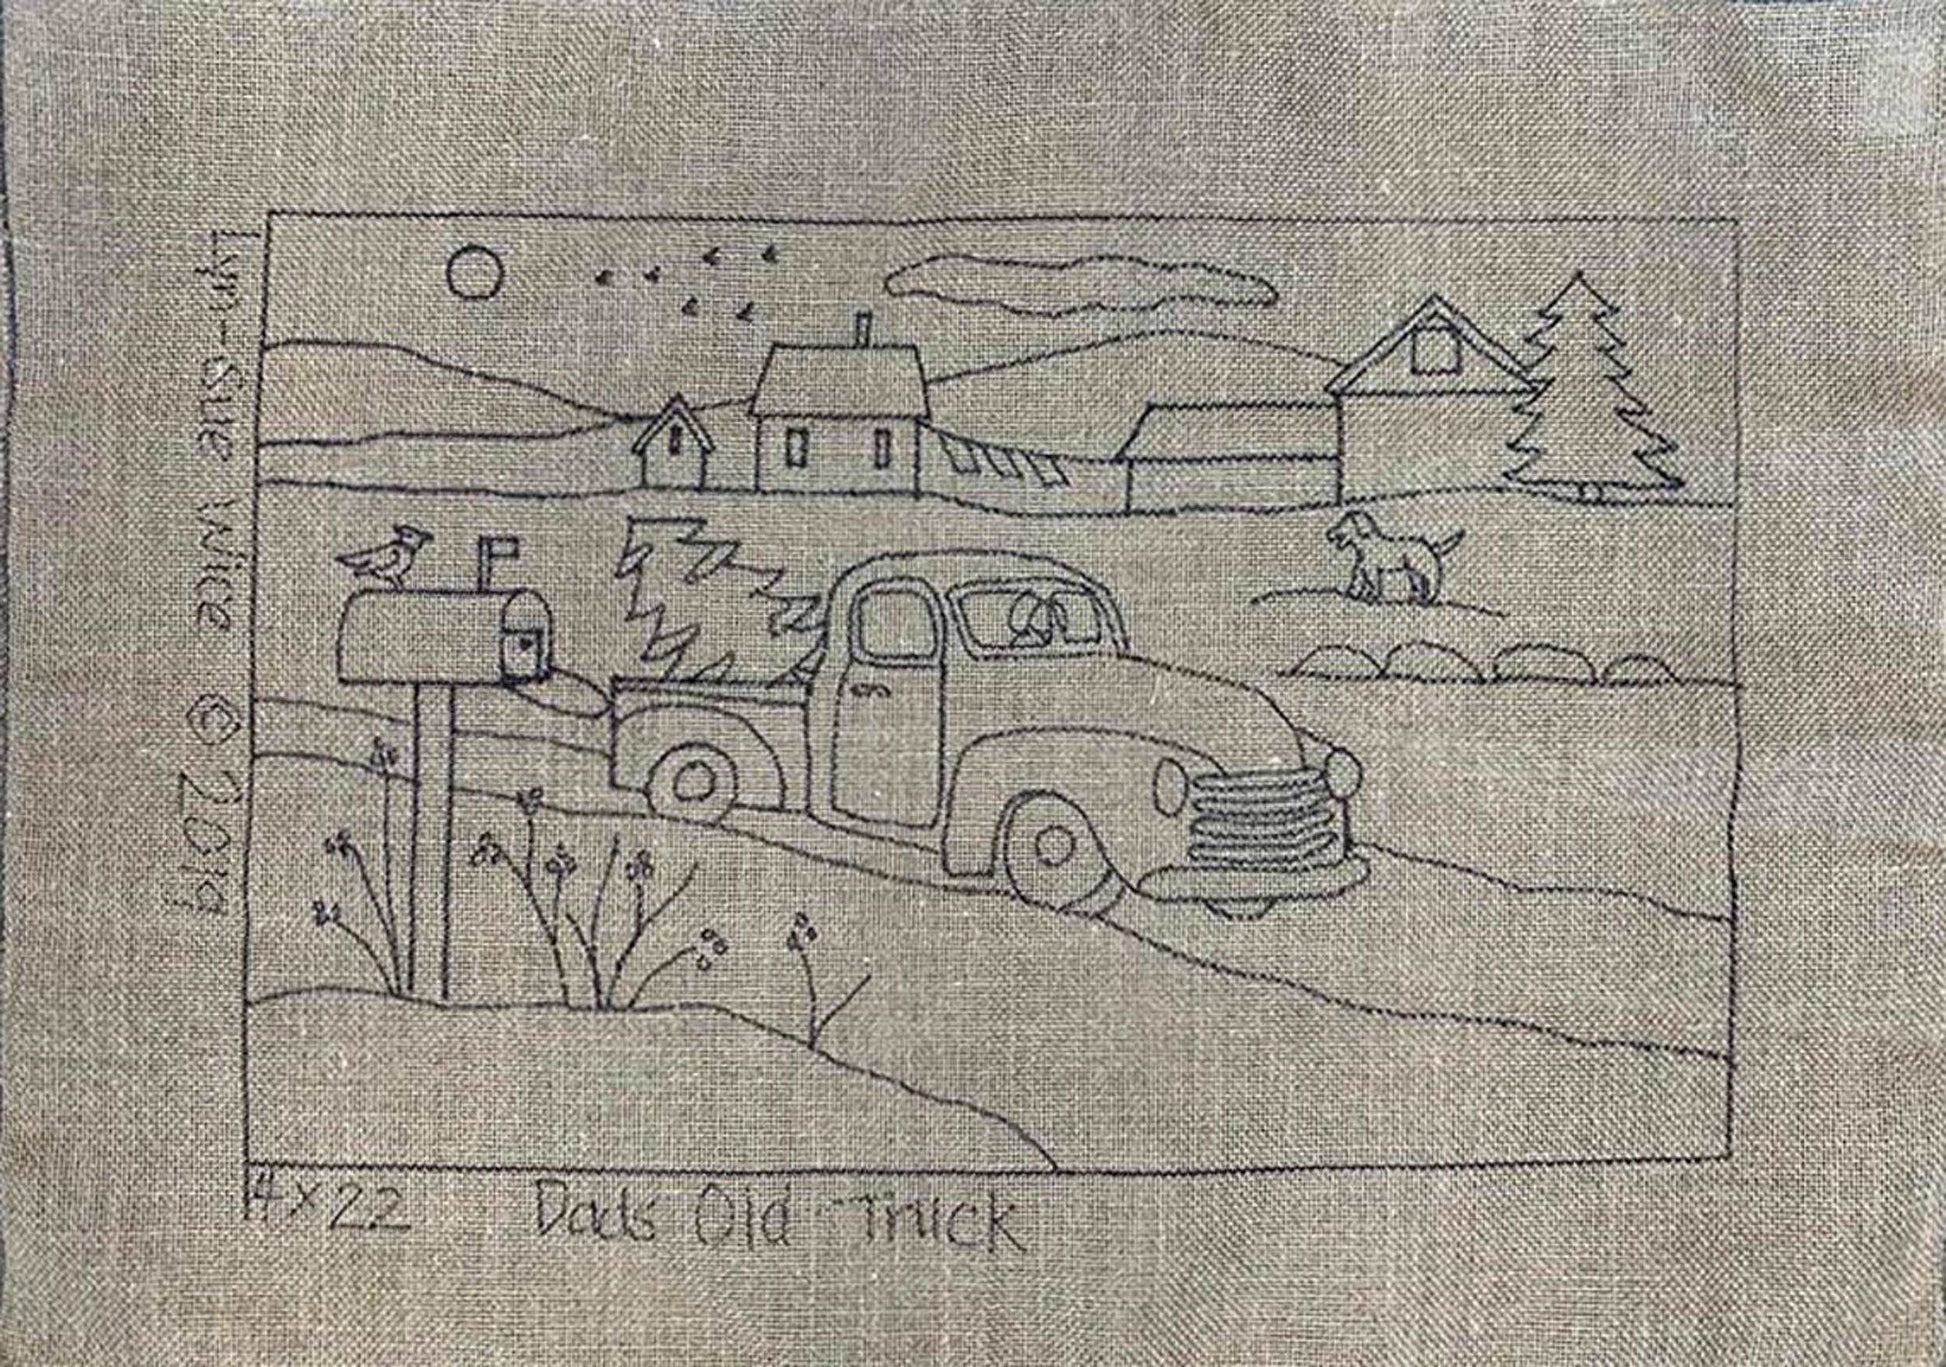 DADS OLD TRUCK Pattern - All About Ewe Wool Shop